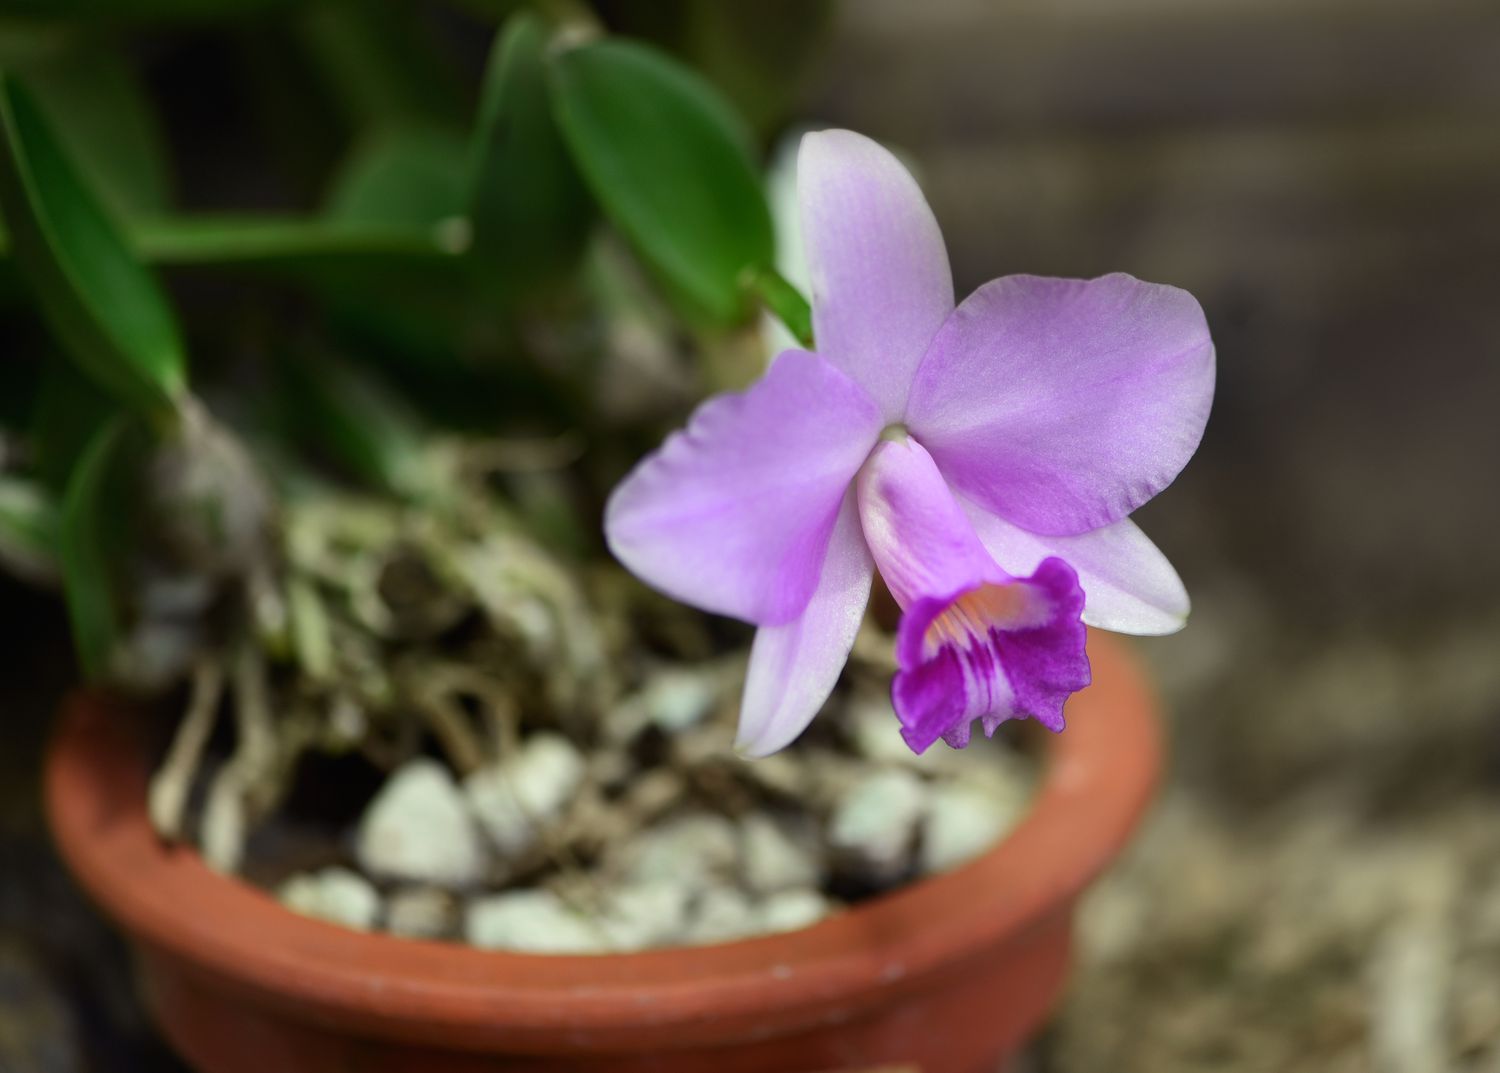 Laelia orchids with light purple and white flowers in pot closeup